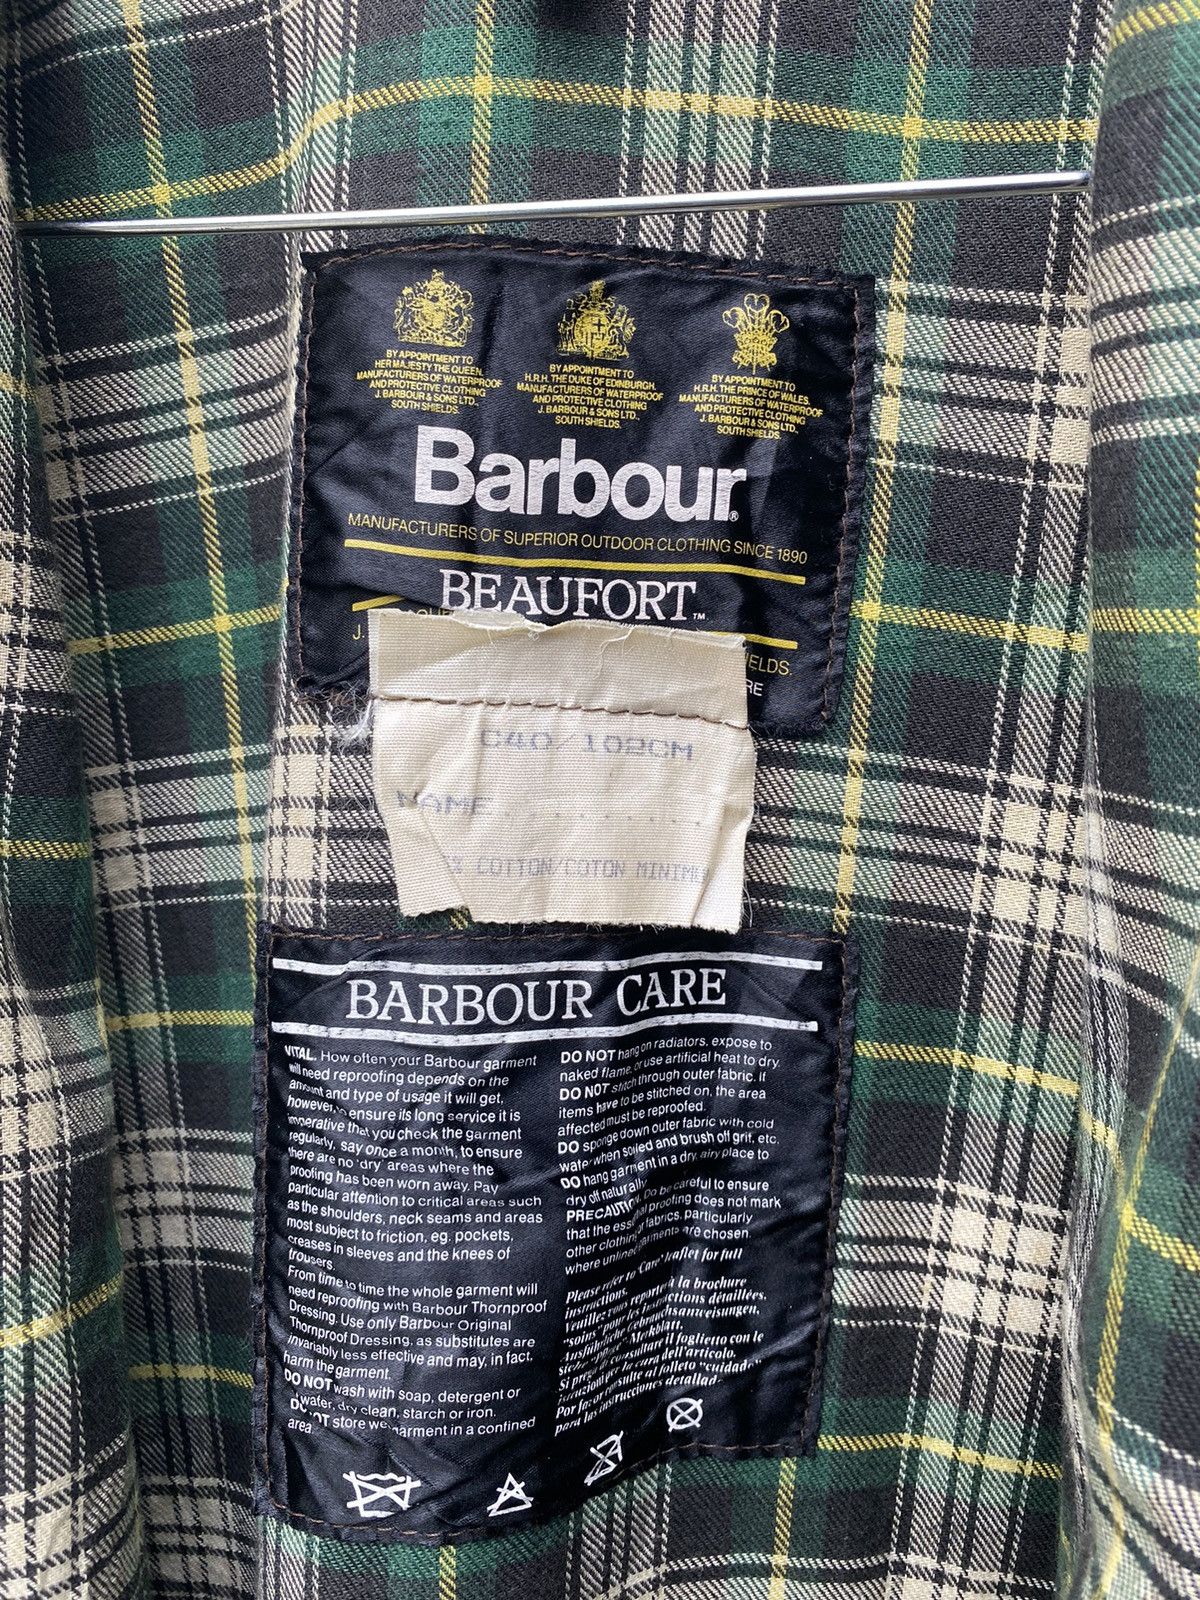 🏴󠁧󠁢󠁥󠁮󠁧󠁿 Barbour Beaufort Waxed Classic Jacket Made In England - 8